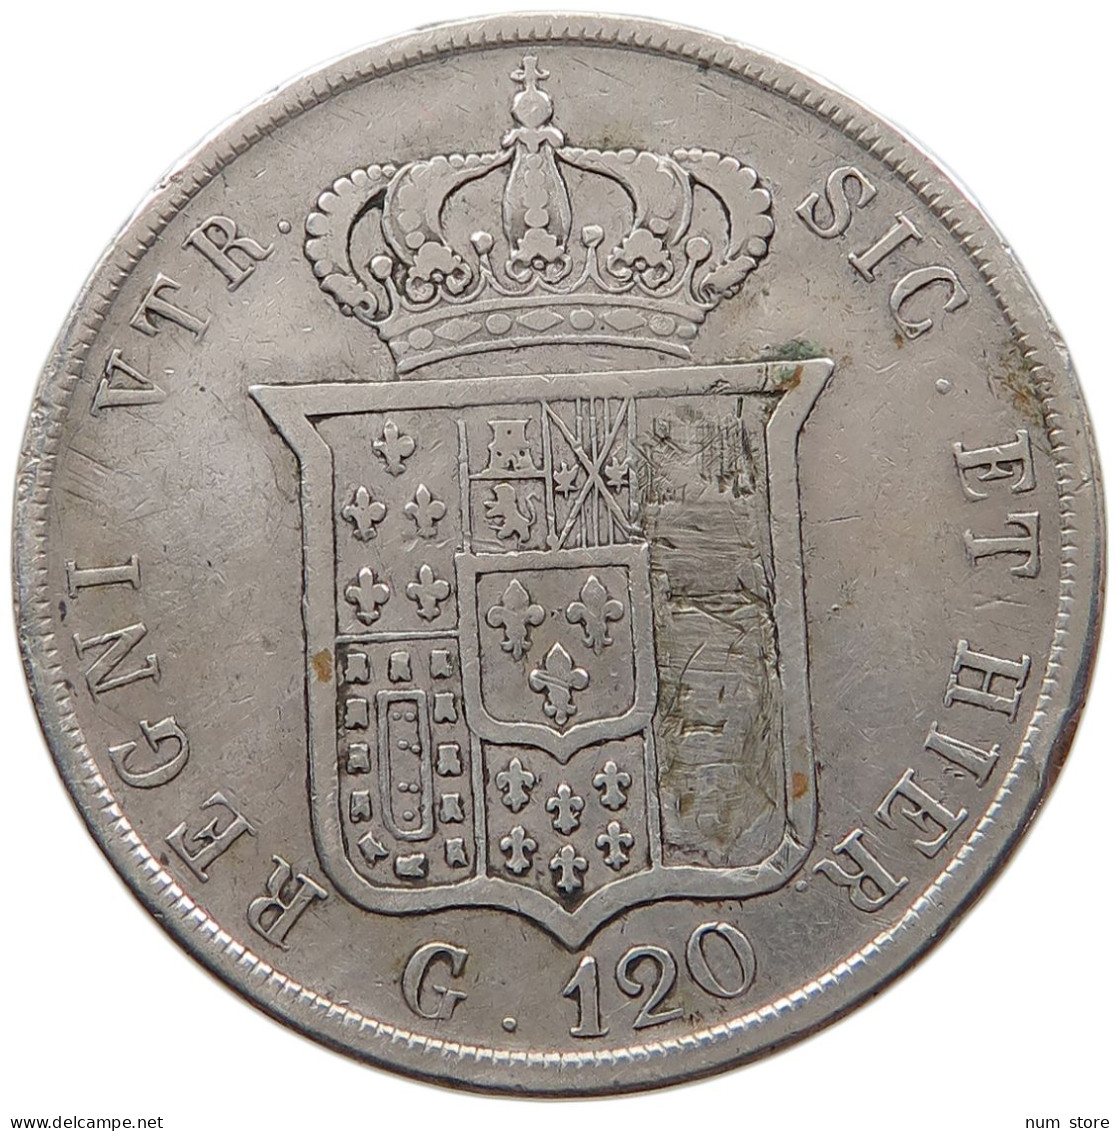 ITALY STATES TWO SICILIES 120 GRANA 1851 FERDINAND II. (1830-1859) #MA 059578 - Due Sicilie